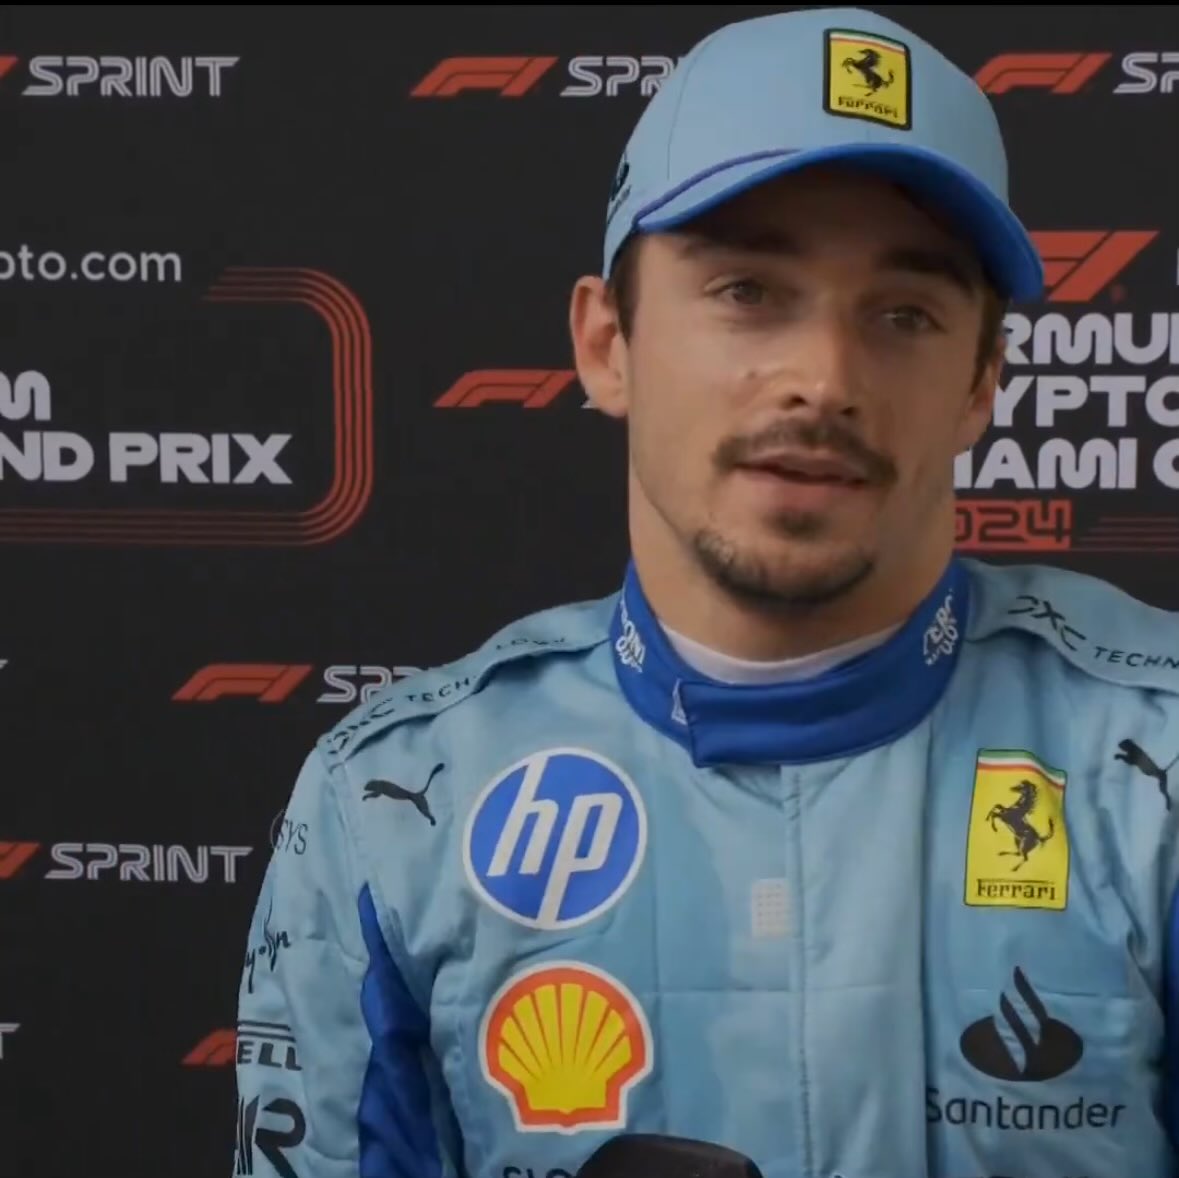 🎙️| Charles Leclerc: “There are so many talks now. You’re only as good as your last race in this sport.” “When you have two races where you are bad in qualifying, people start to talk. So it’s good to stop that.” 👑👑👑